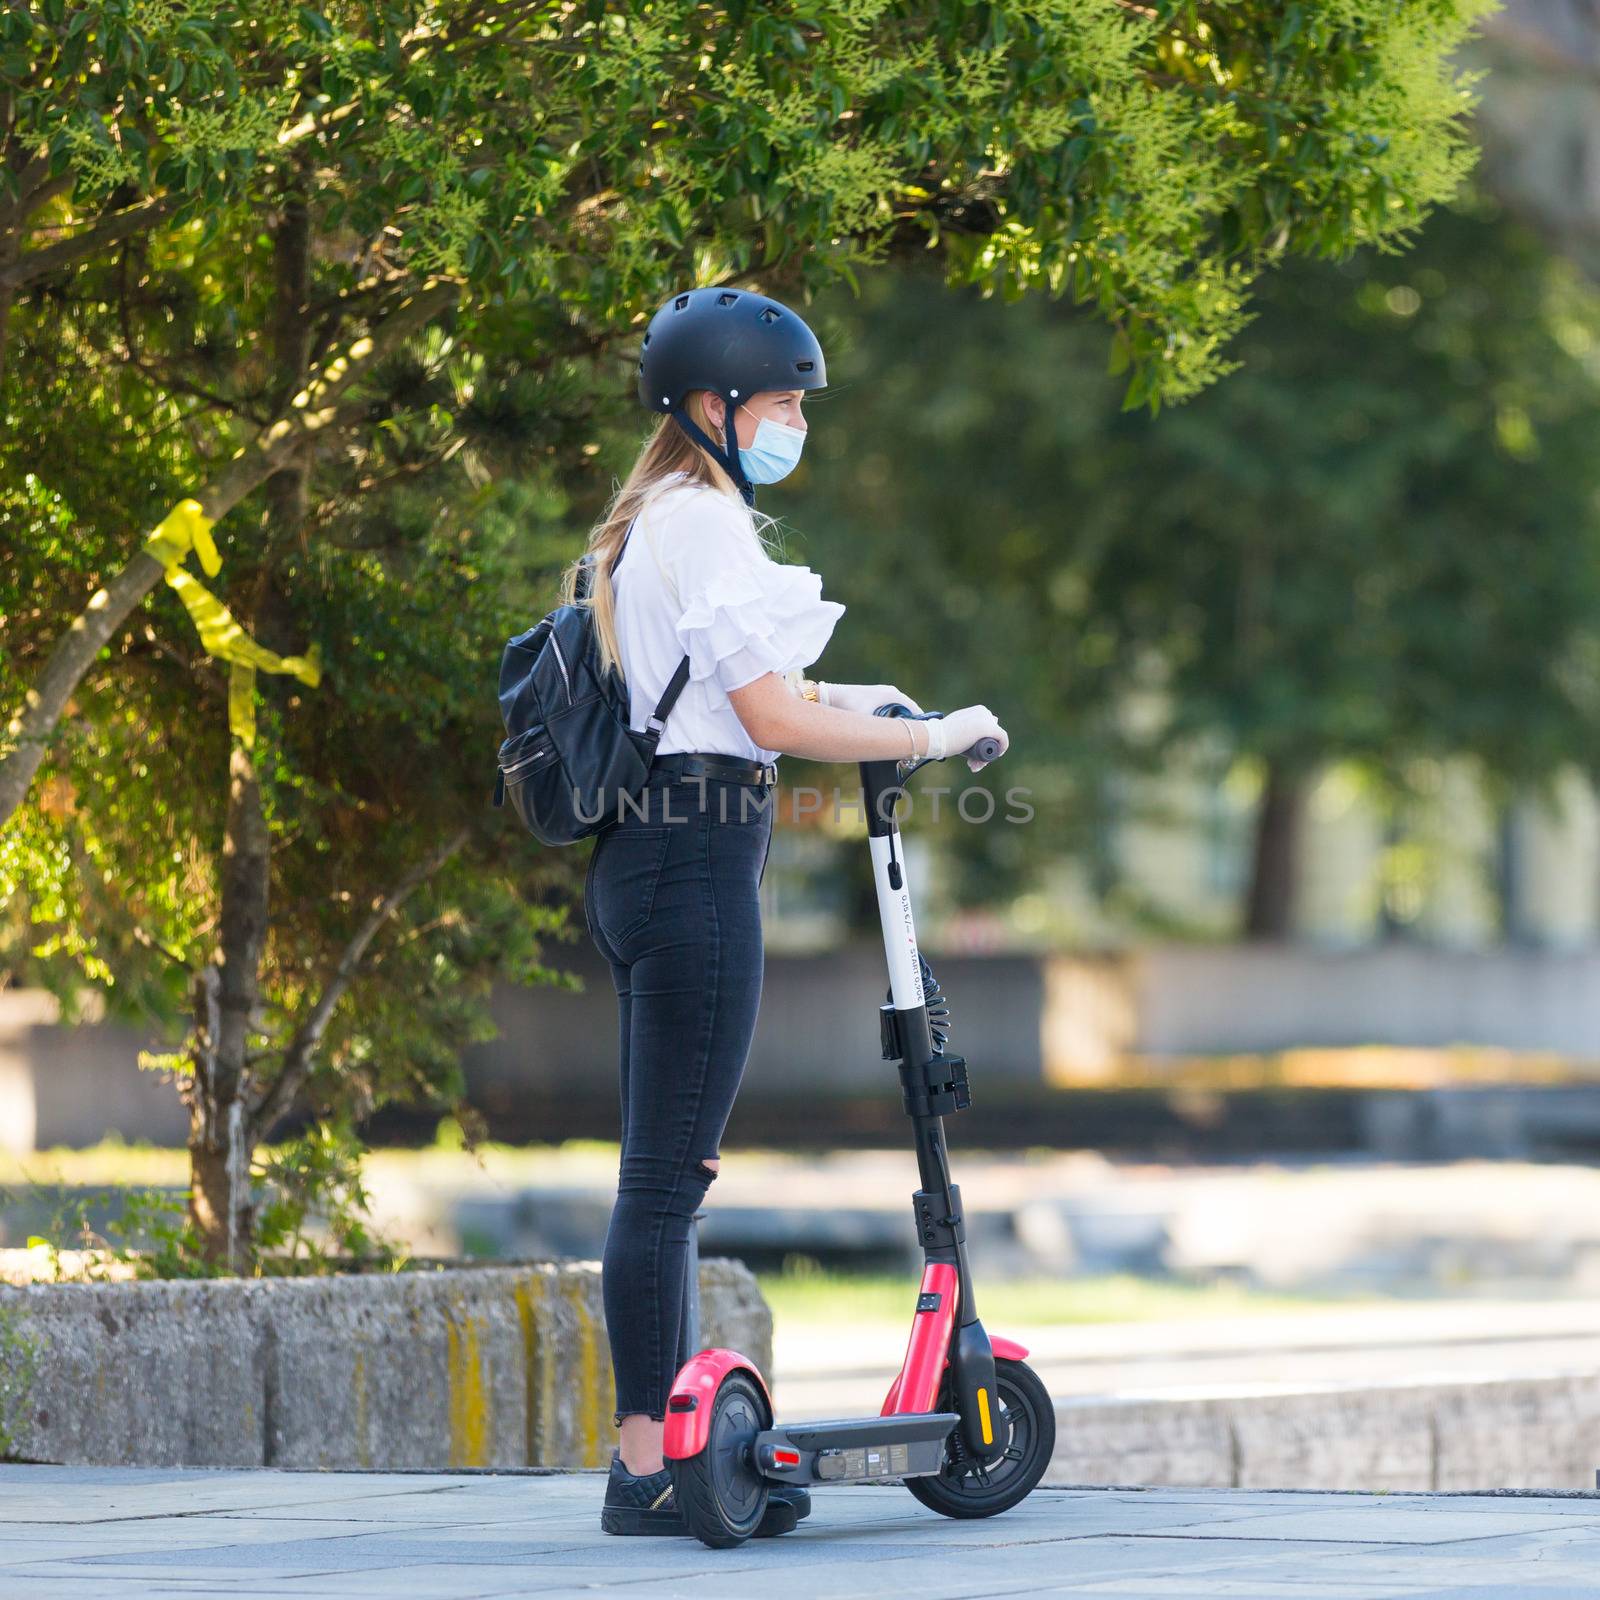 Trendy fashinable teenager girl wearing corona virus protective face mask in public while using rental electric scooters in city environment. New eco-friendly city transport in Ljubljana, Slovenia by kasto